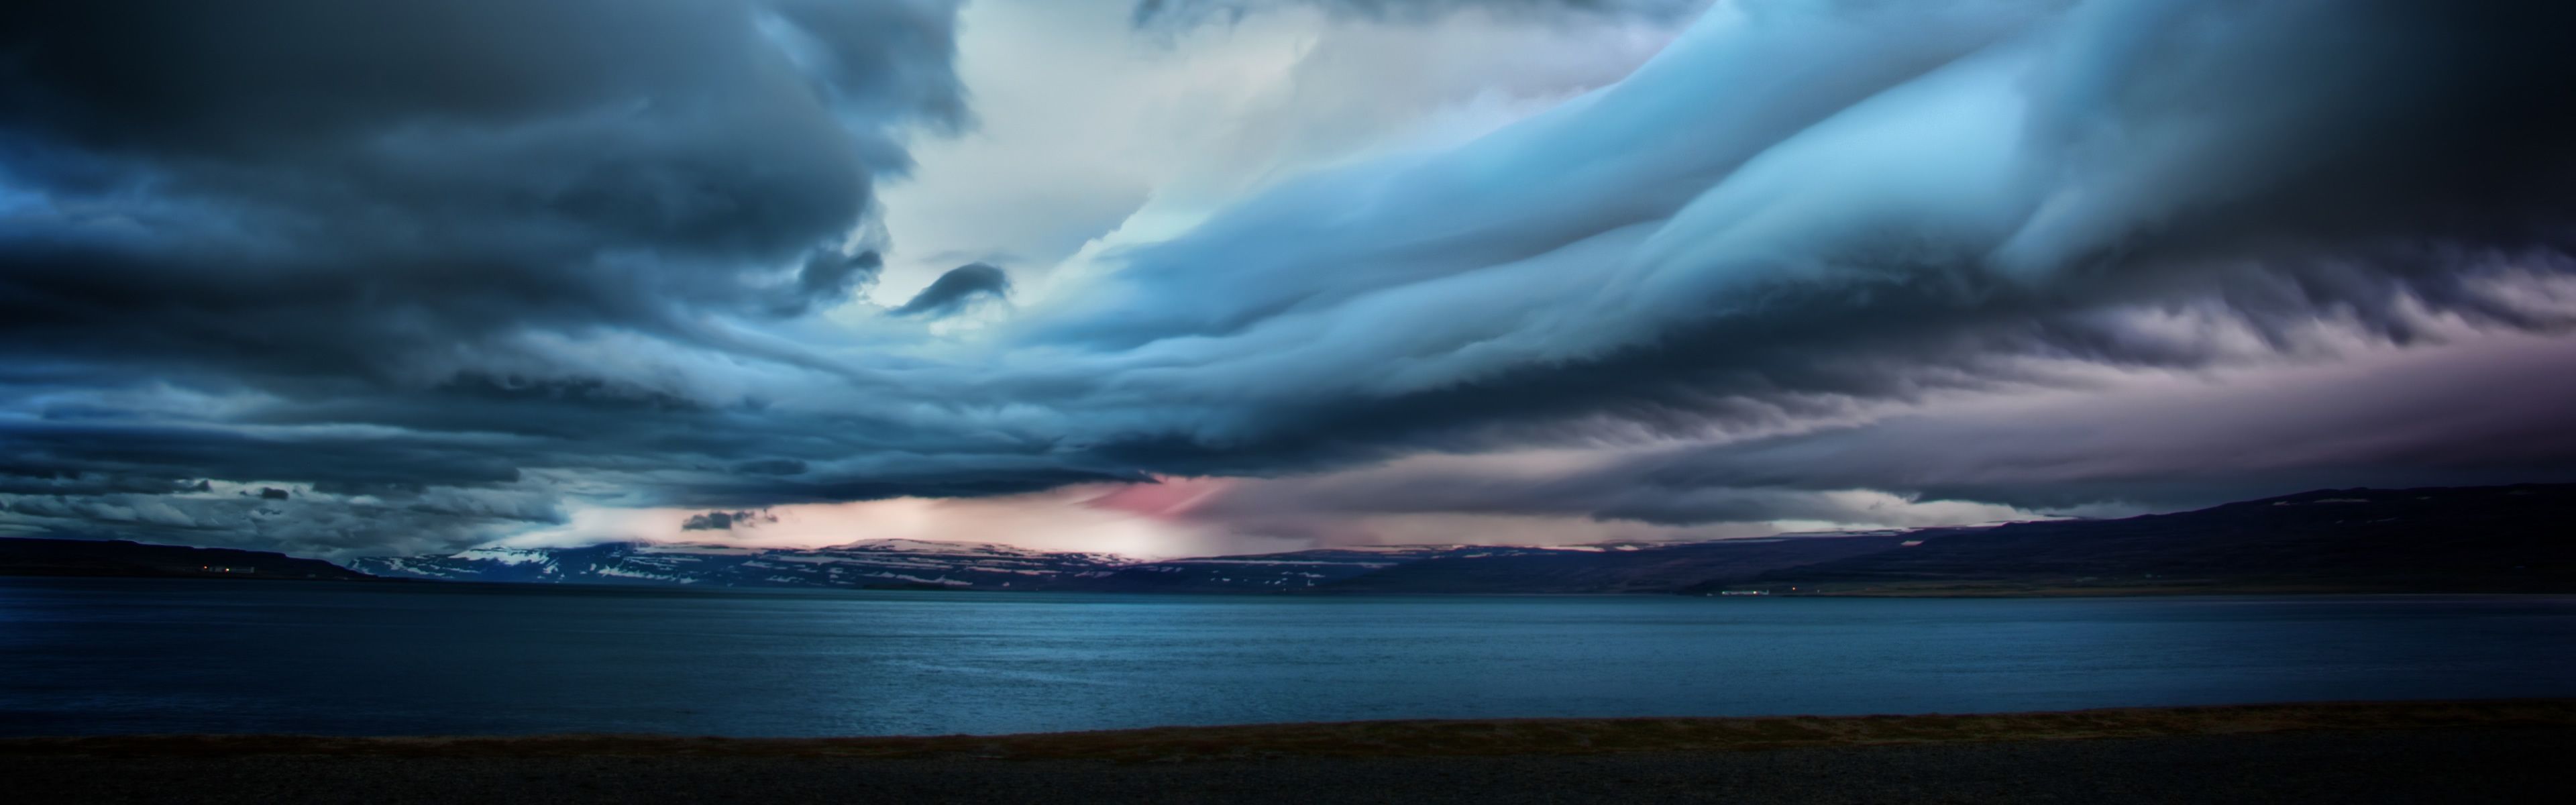 Stormy Clouds iPhone Panoramic Wallpaper Download | iPad ...